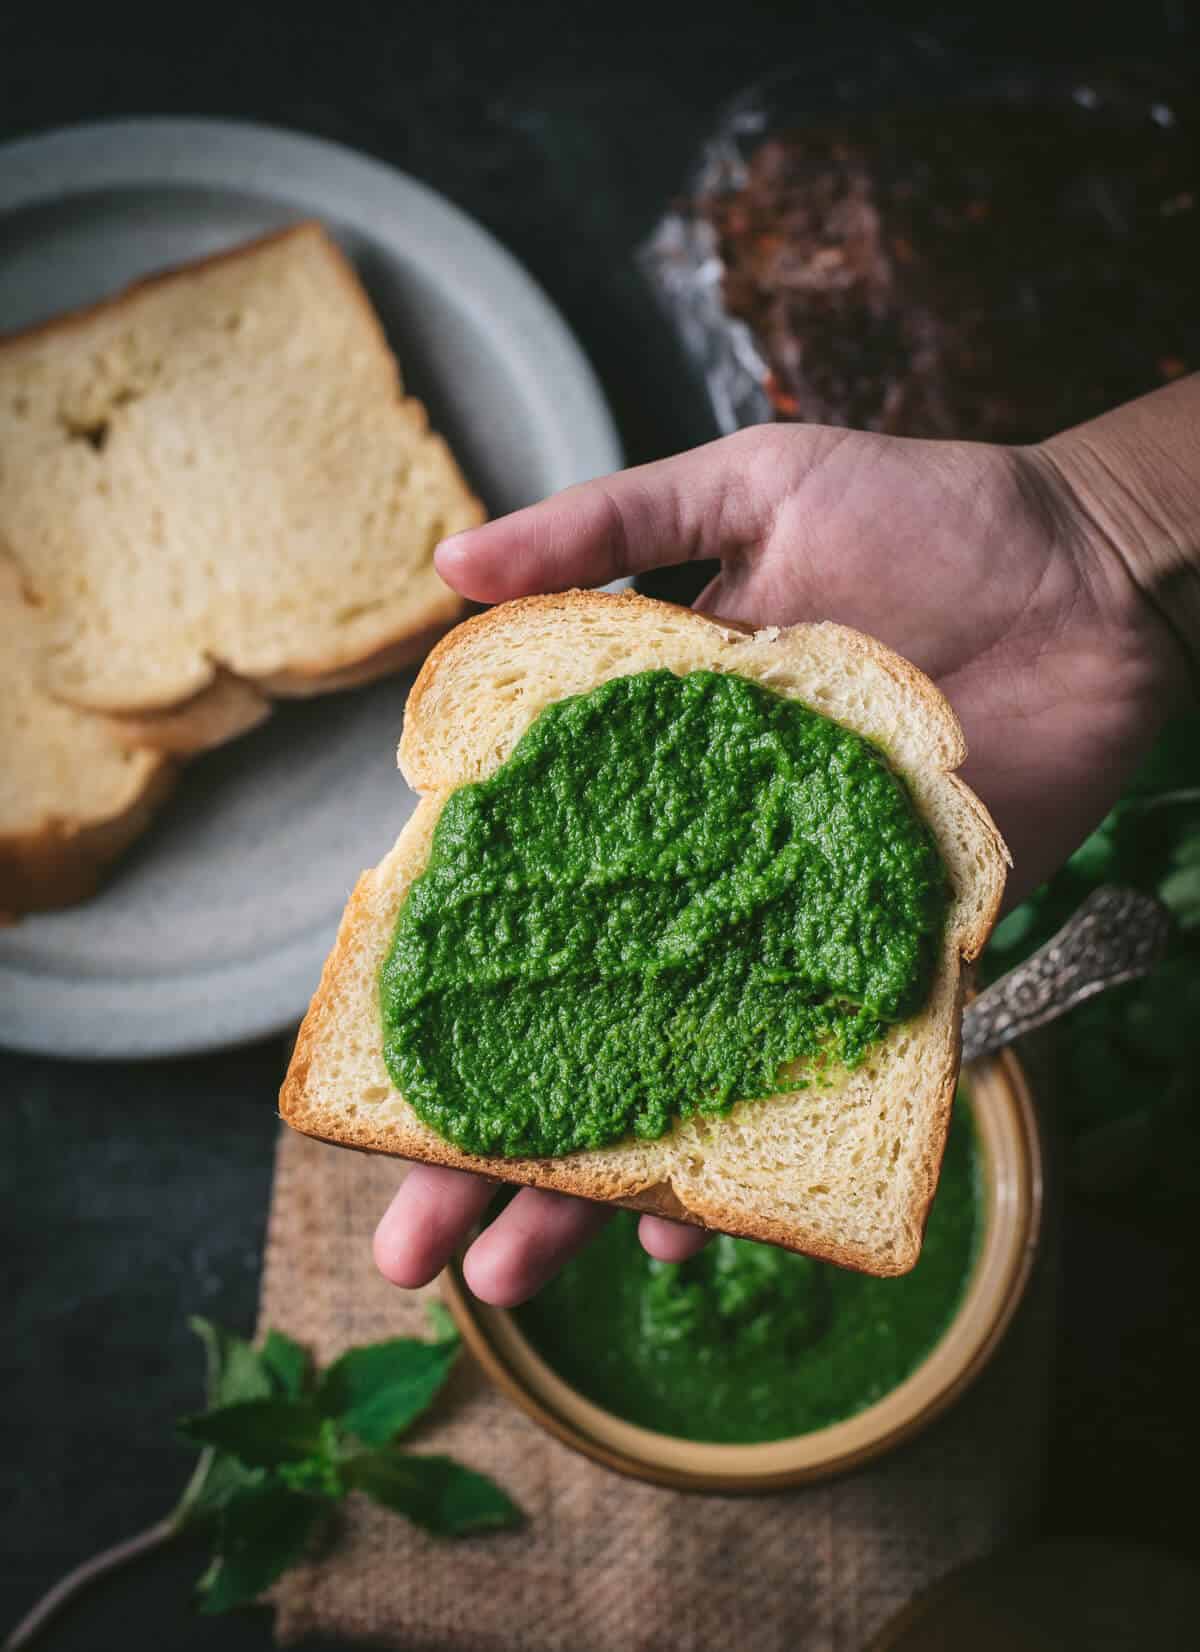 Bread slathered with green chutney is placed on a palm. There are additional bread slices kept on a grey plate. 